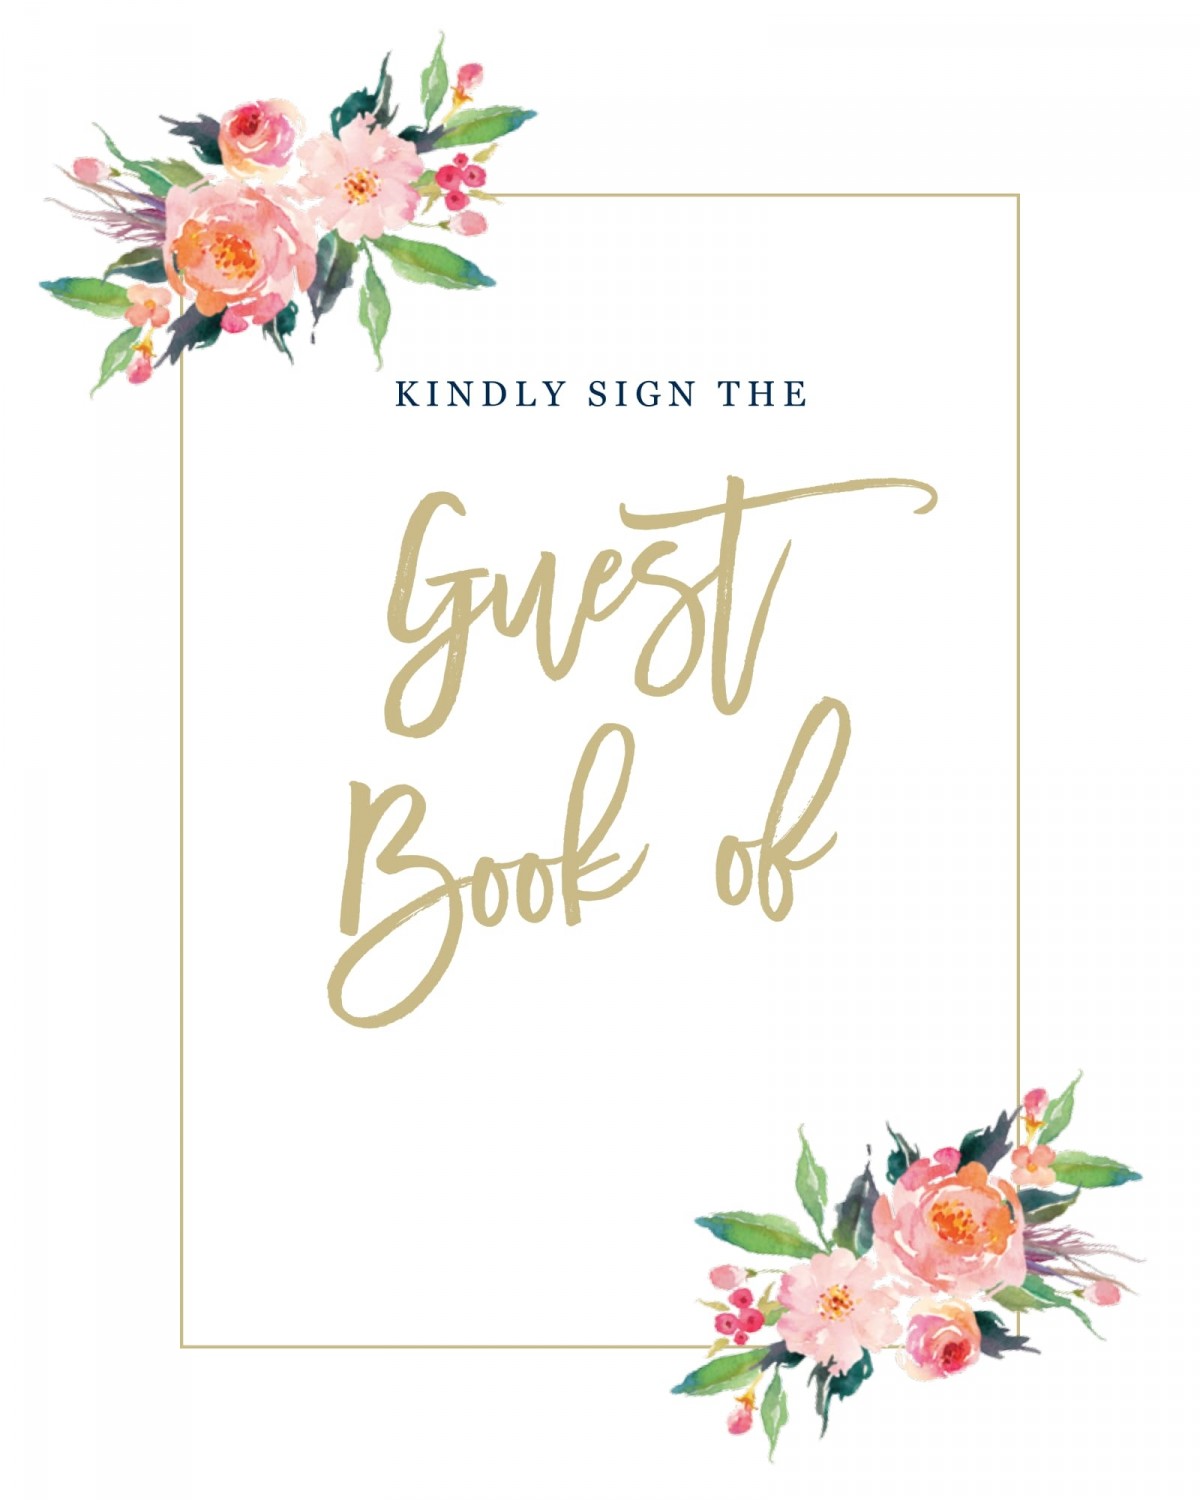 Standing Ovation Guest Book Sign Printables by Basic Invite